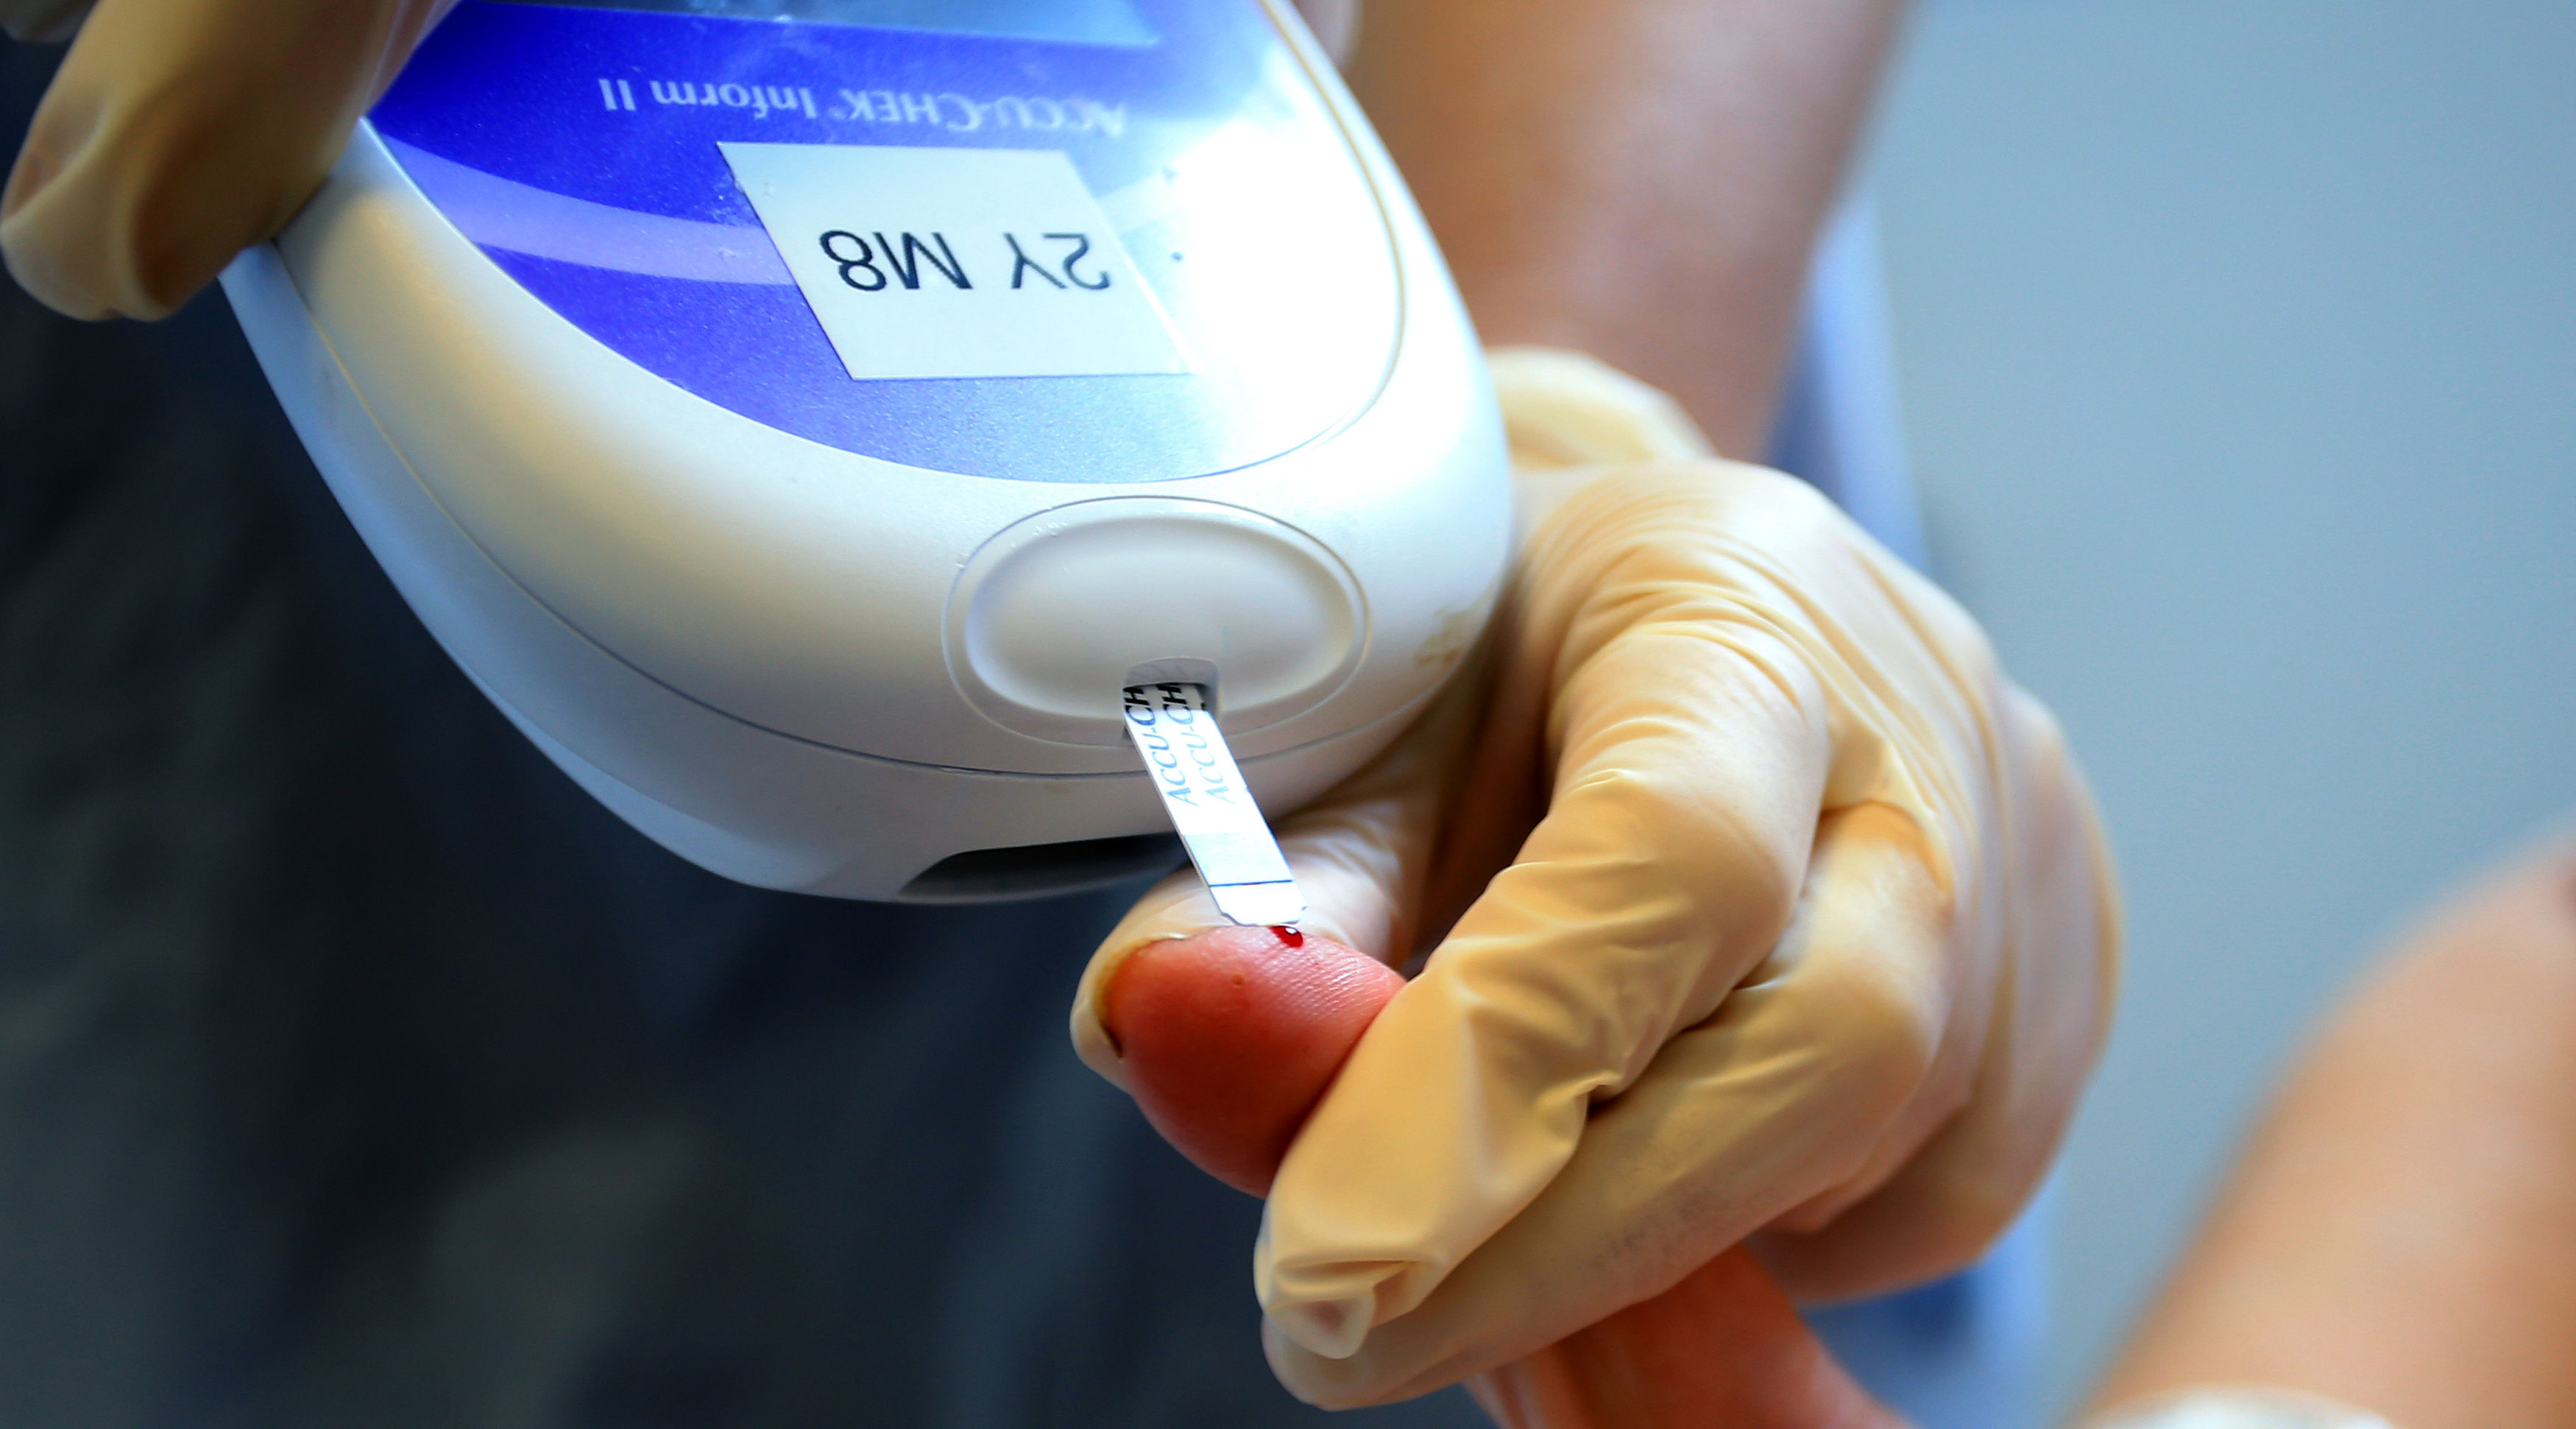 Diabetes test (Peter Byrne/PA Wire)